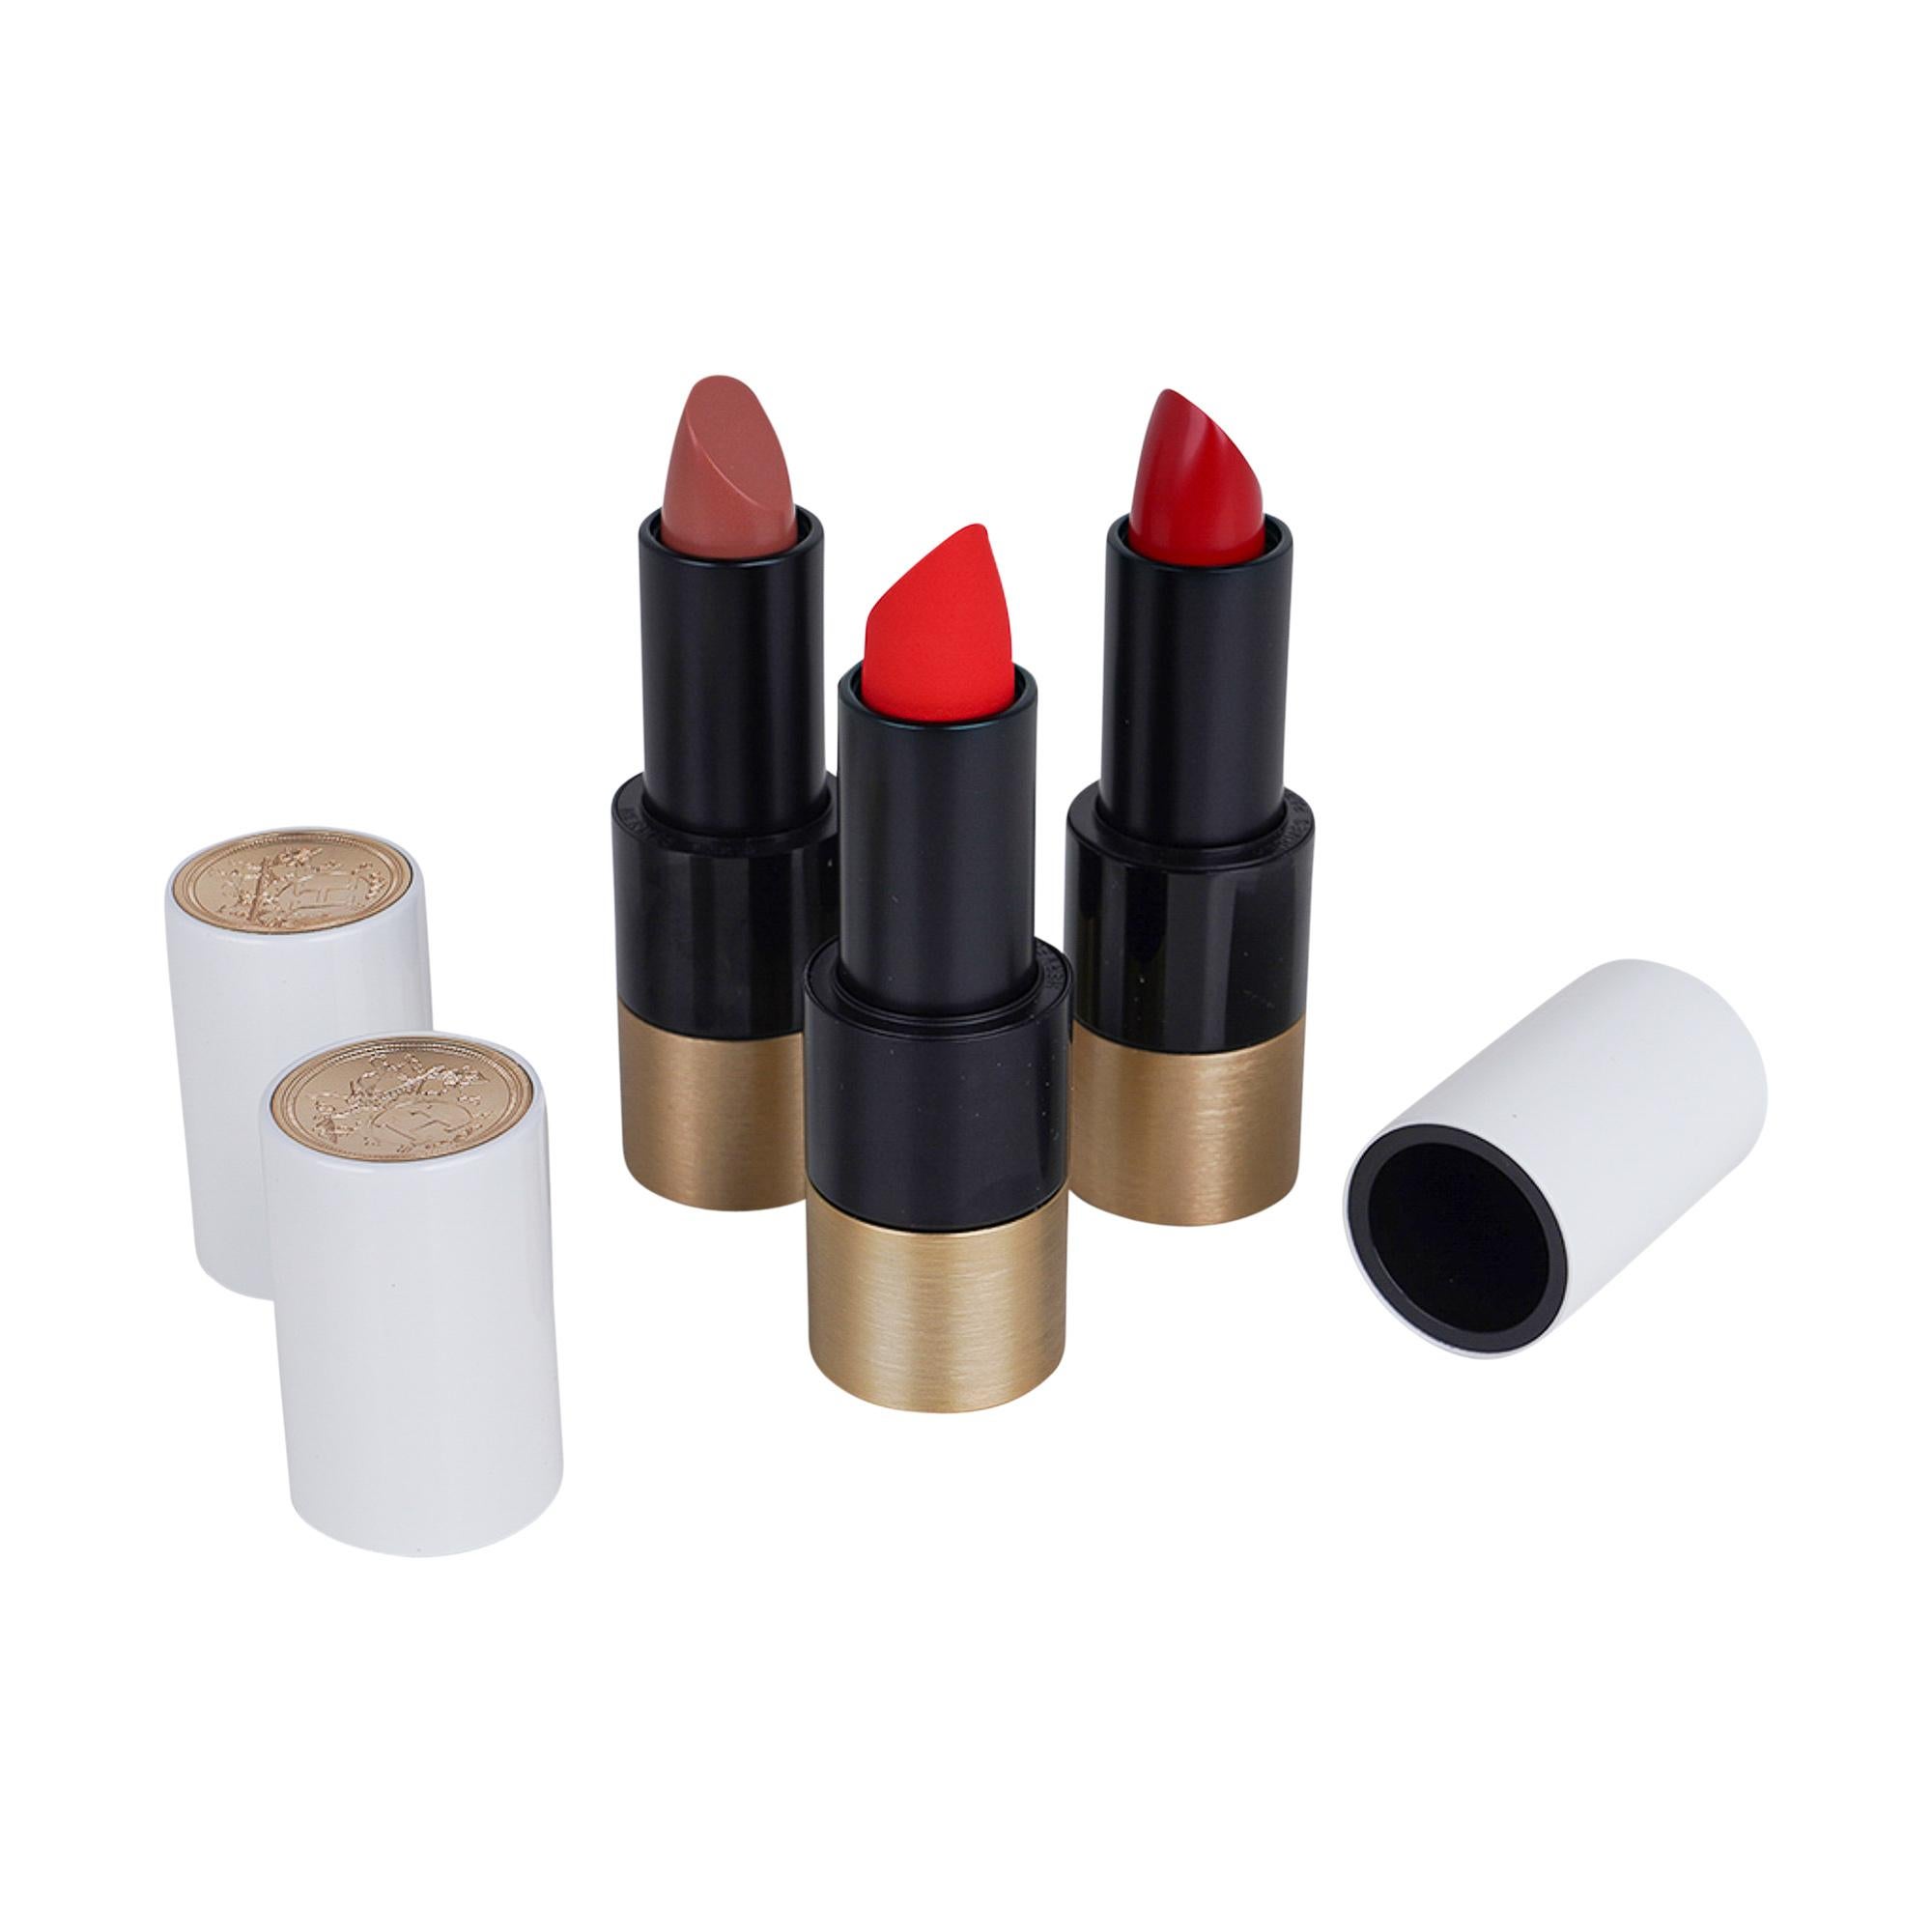 Mightychic offers a Rouge Hermes Piano 24 set brings 10 matte finishes and 14 satin finishes in a range of colours to set any mood in the coming year.
Refillable lacquered, polished with metal accent lipstick holders designed by Pierre Hardy have a